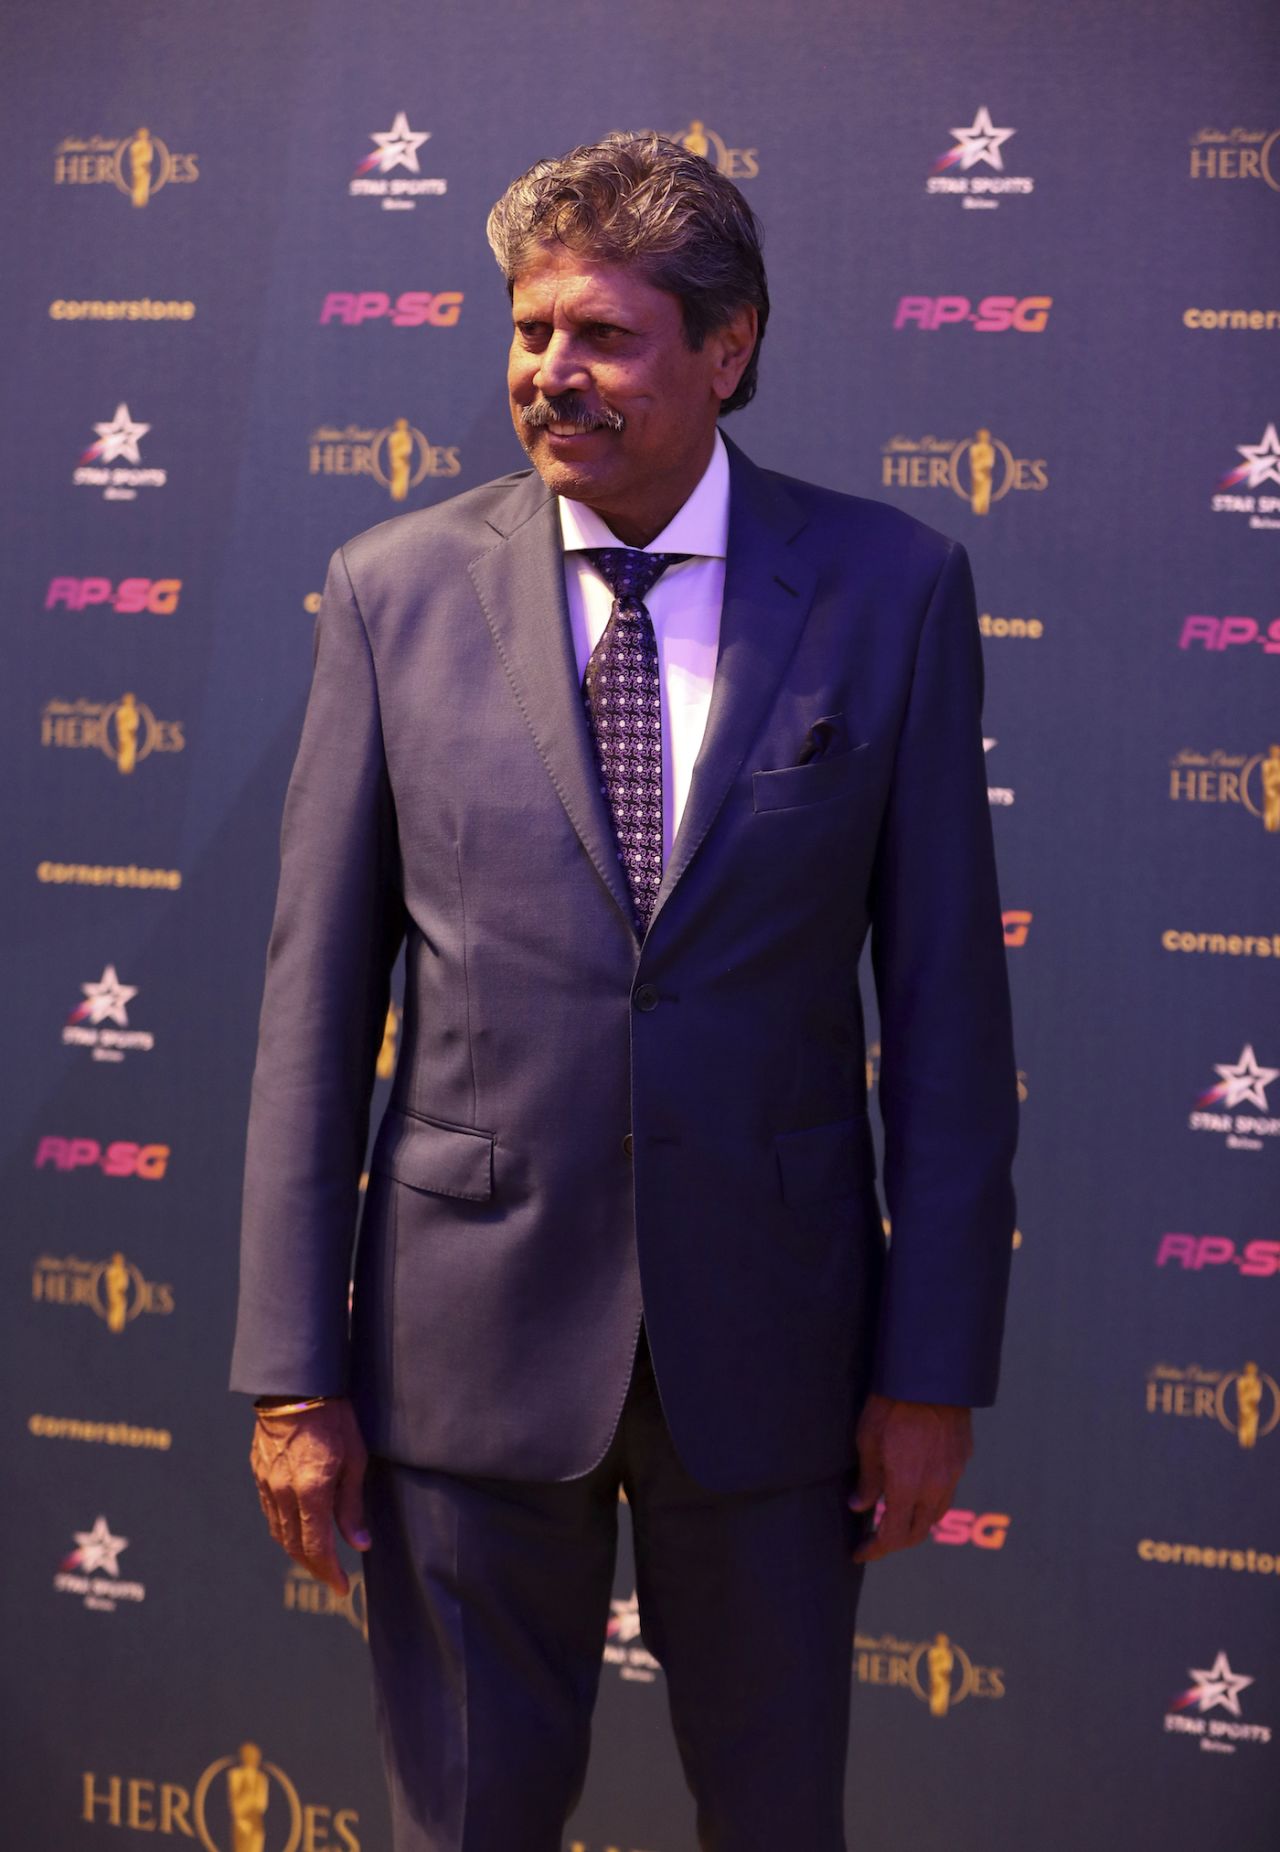 Kapil Dev arrives at an event, London, May 23, 2019